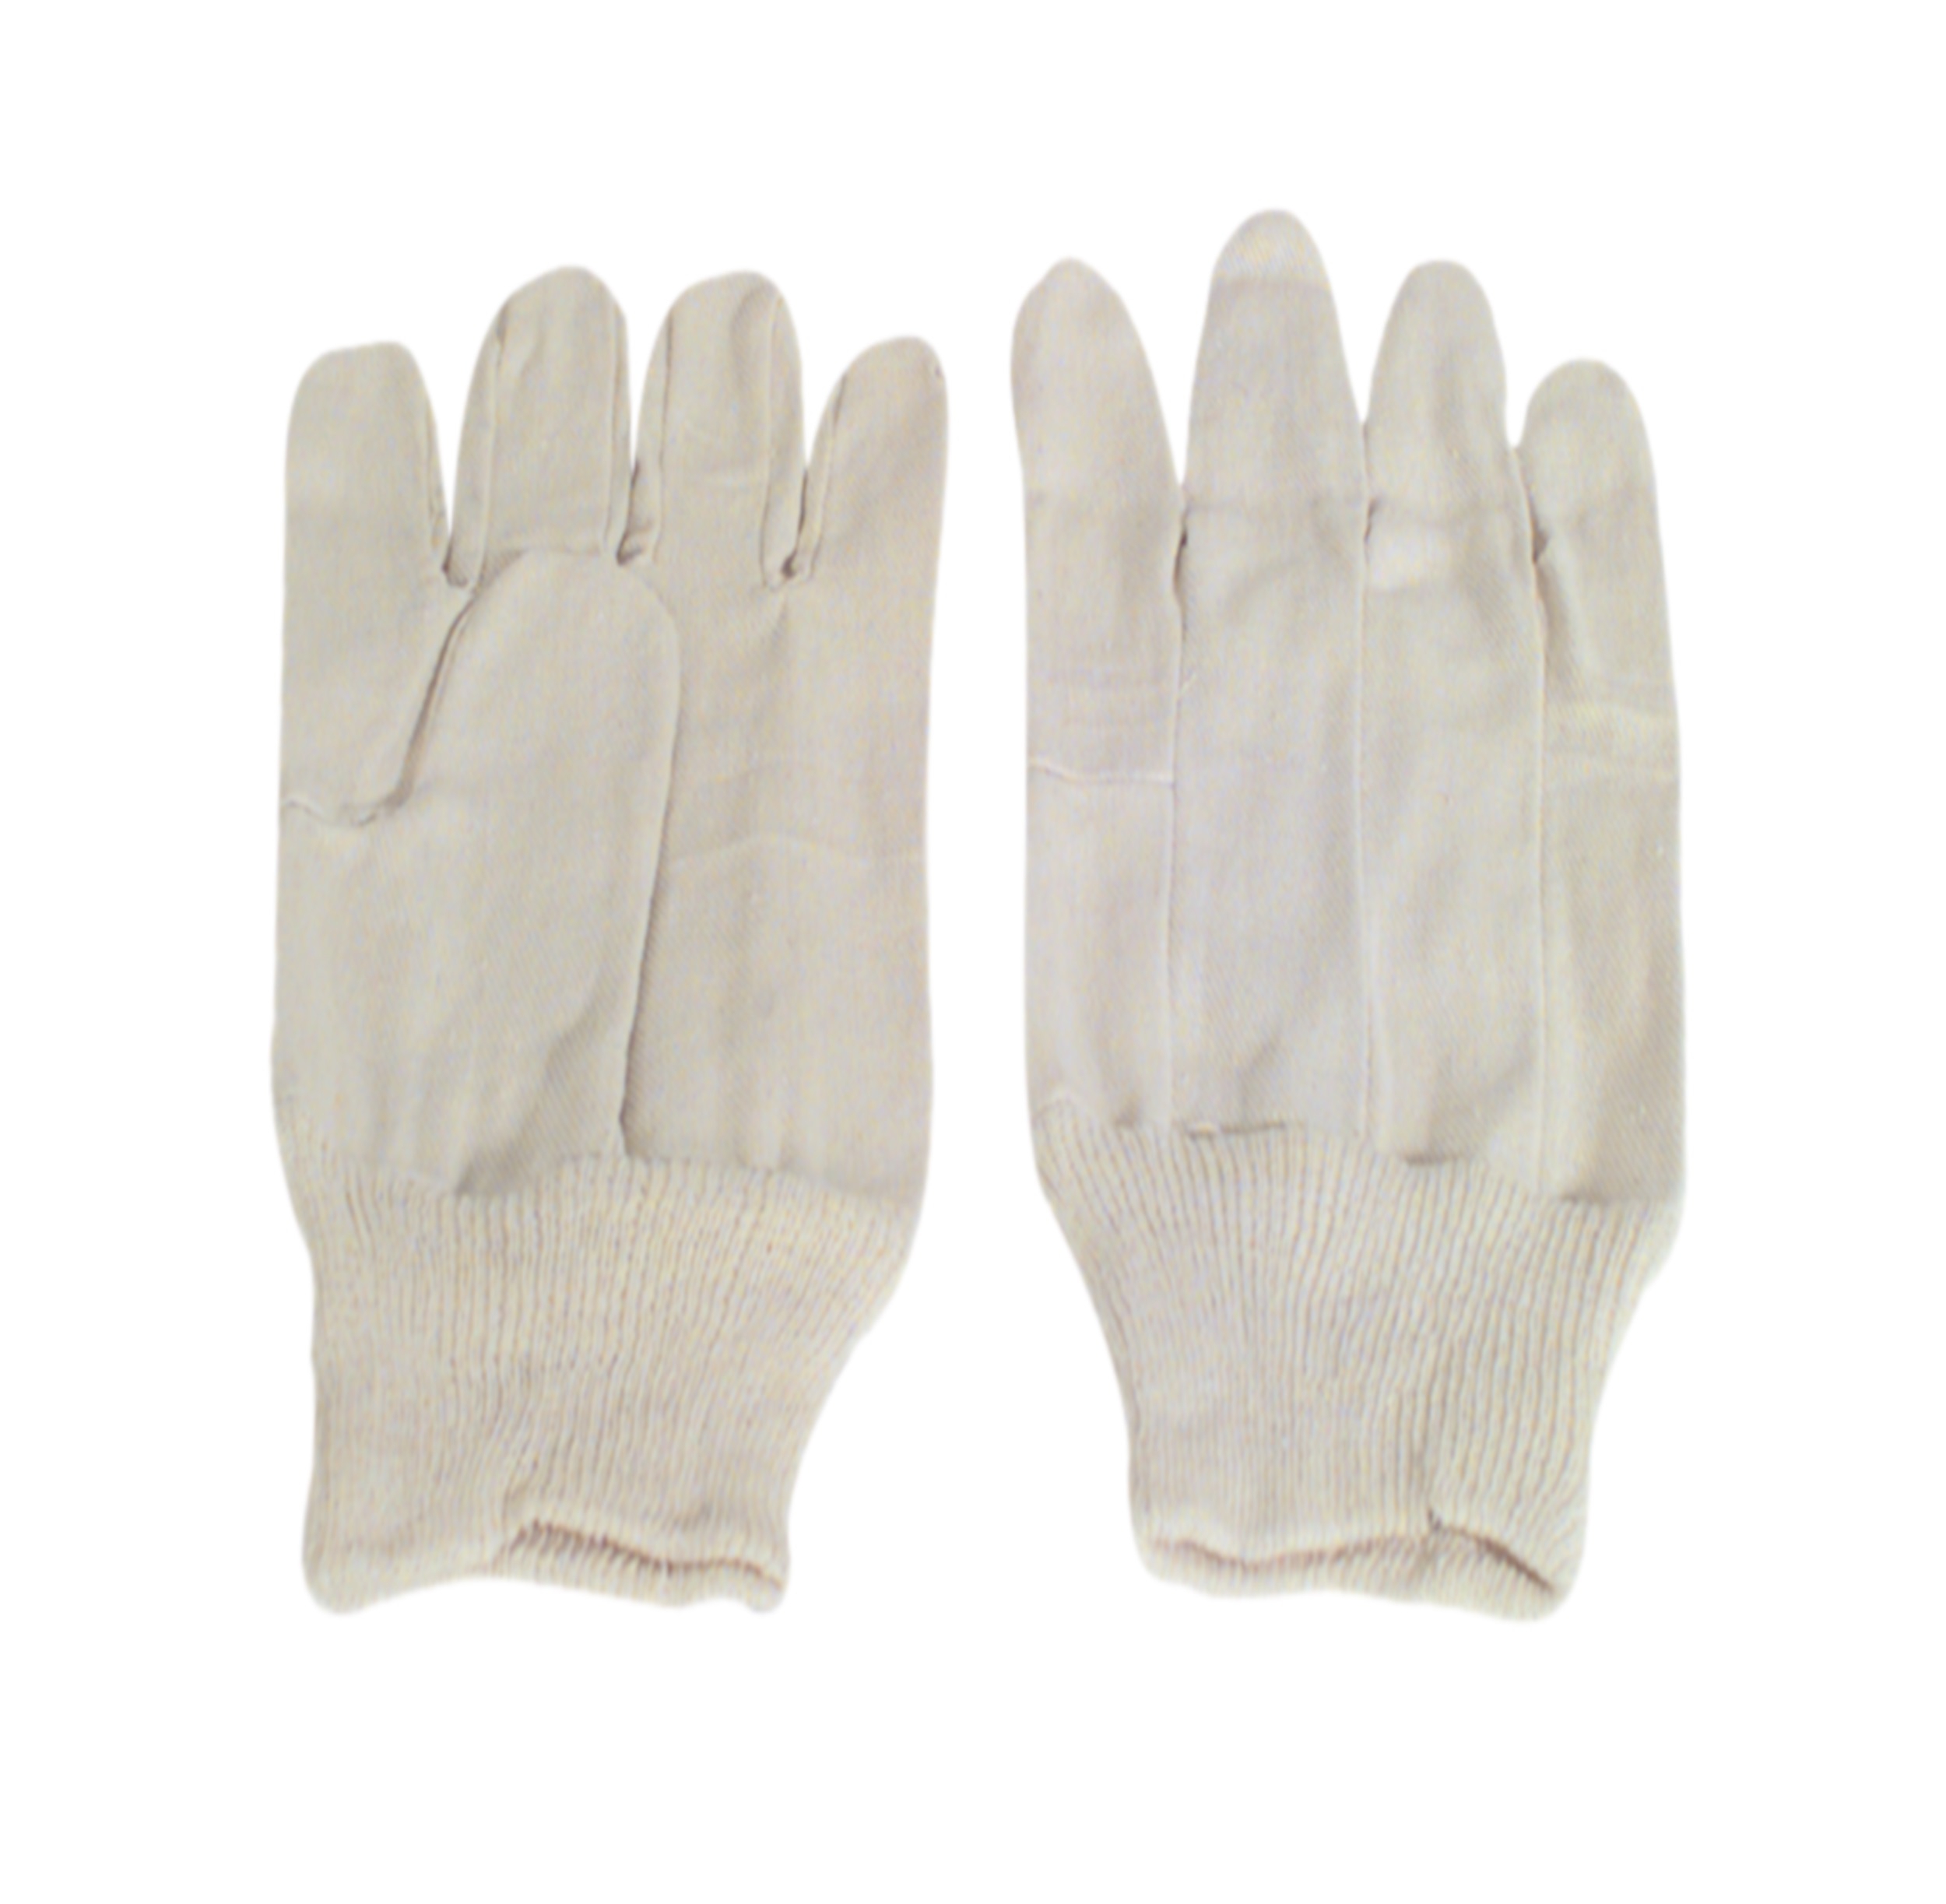 Cotton Drill Gloves Size 10